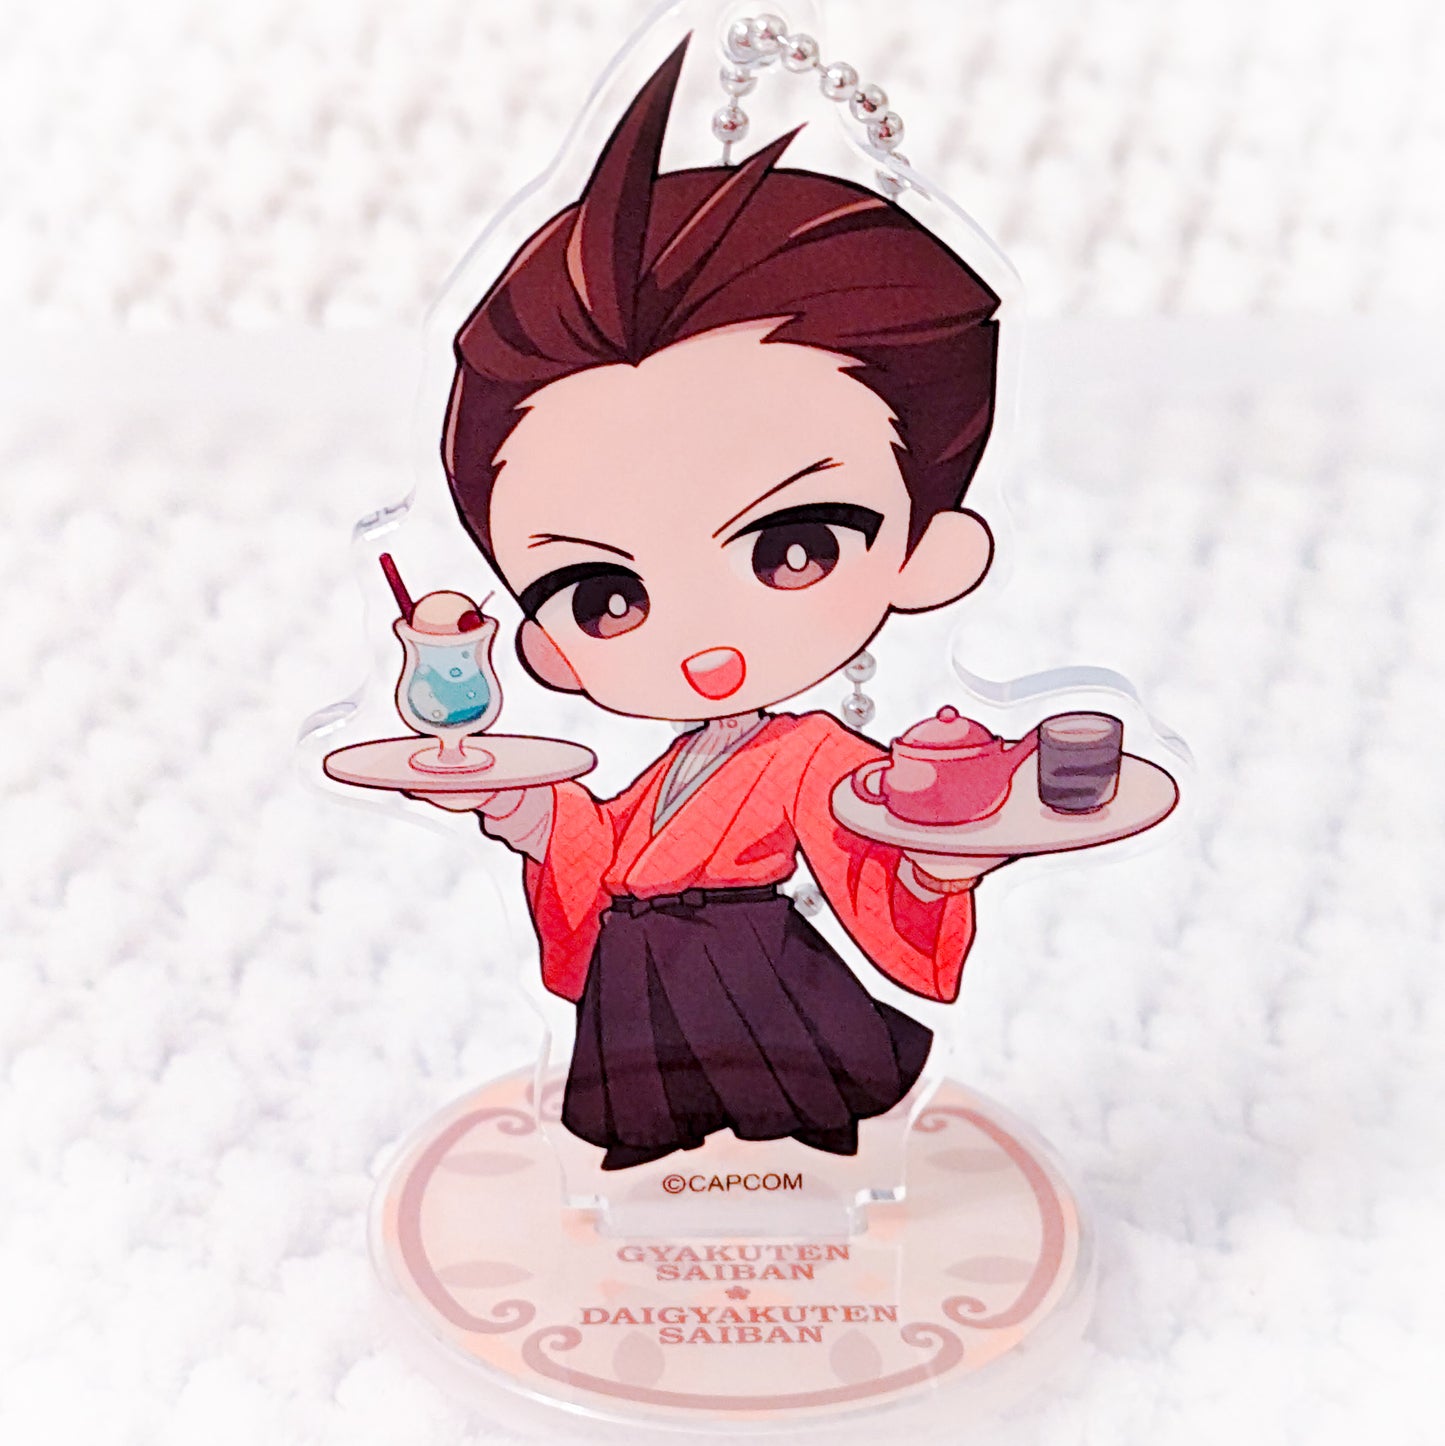 Apollo Justice - Ace Attorney Capcom Cafe Acrylic Keychain Stand